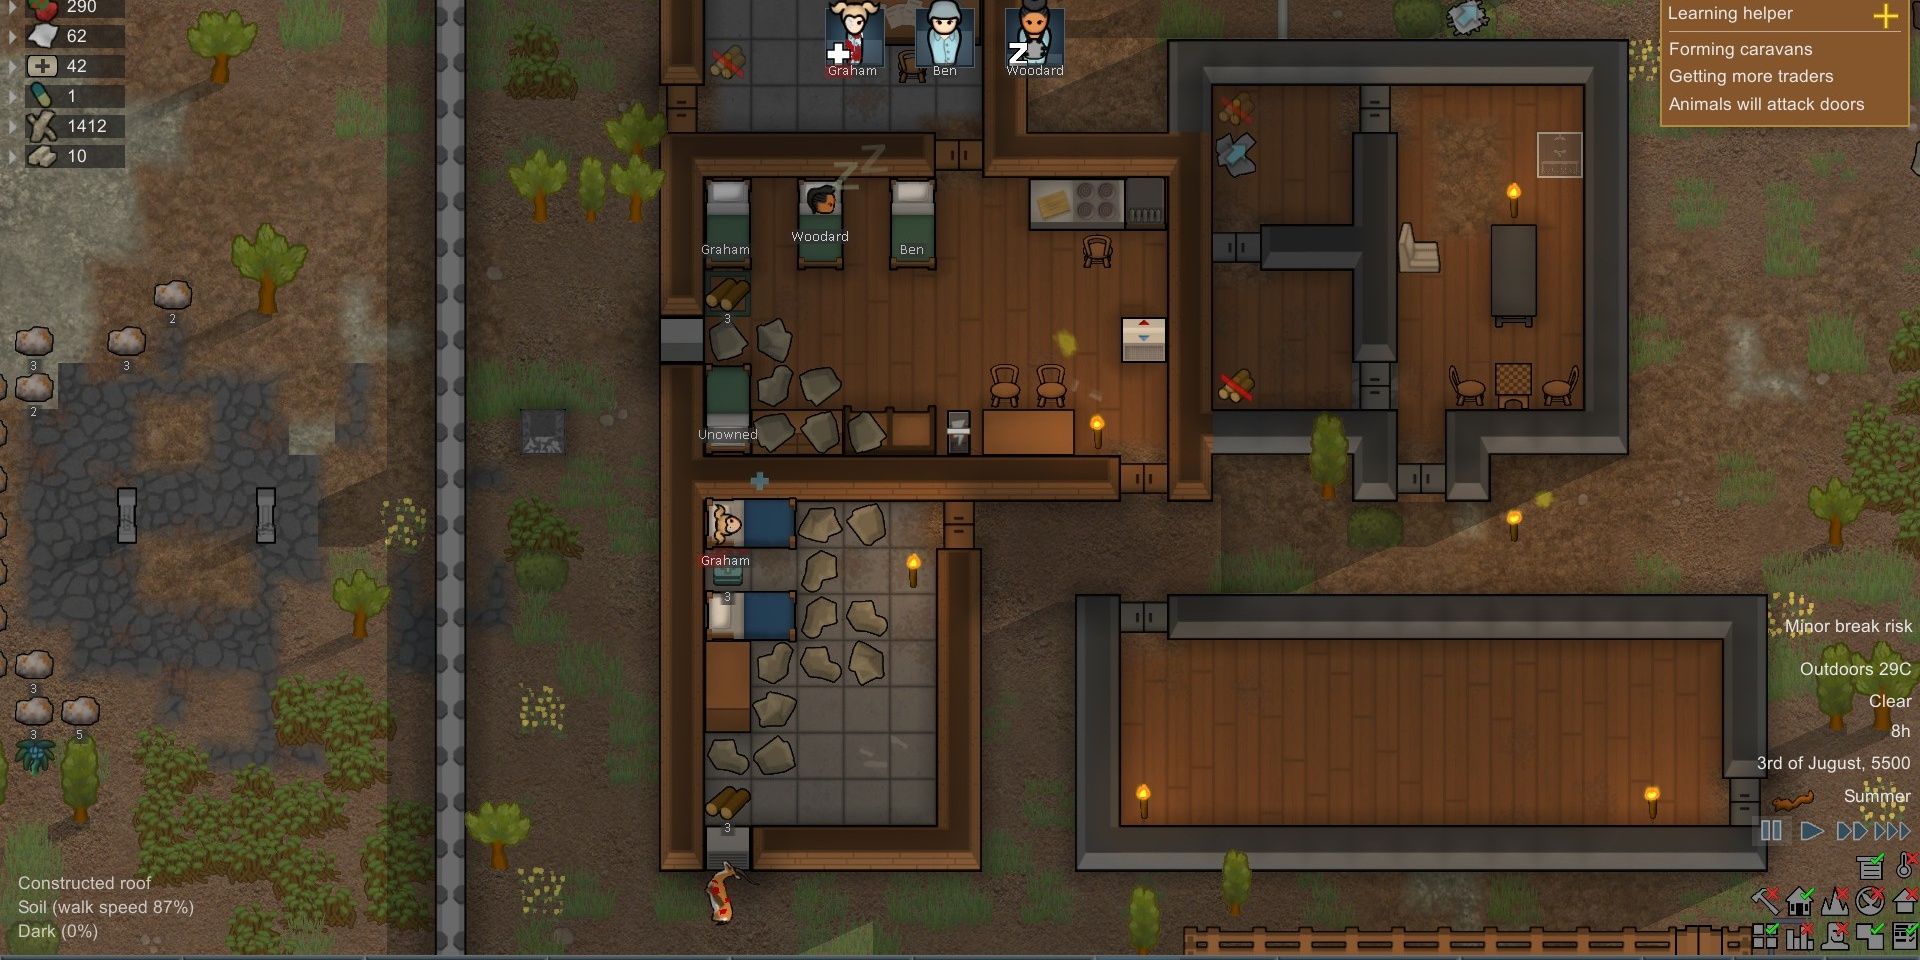 In-game screenshot of a wounded colonist